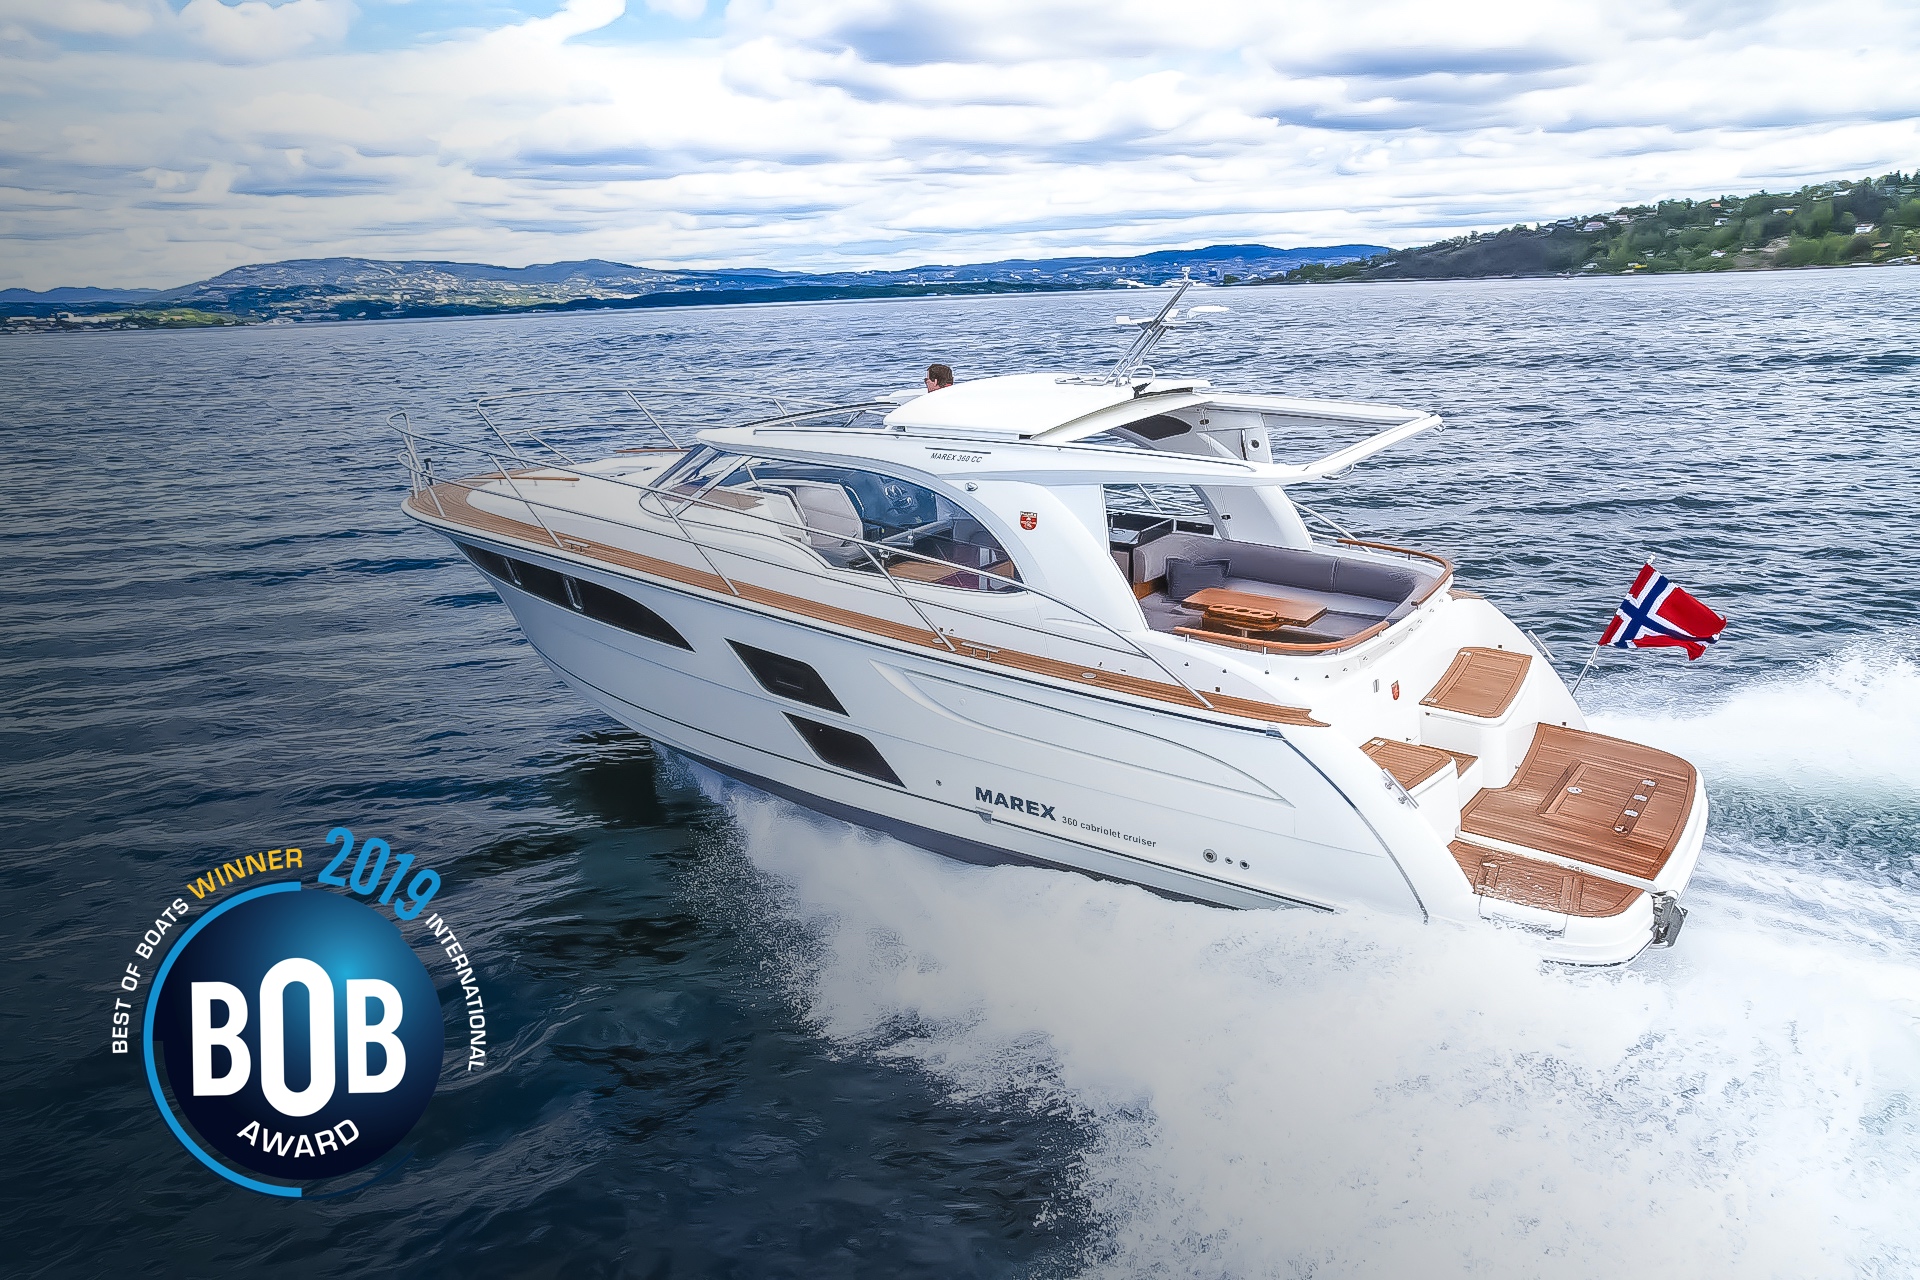 best of boat award family category marex 360 cabriolet cruiser